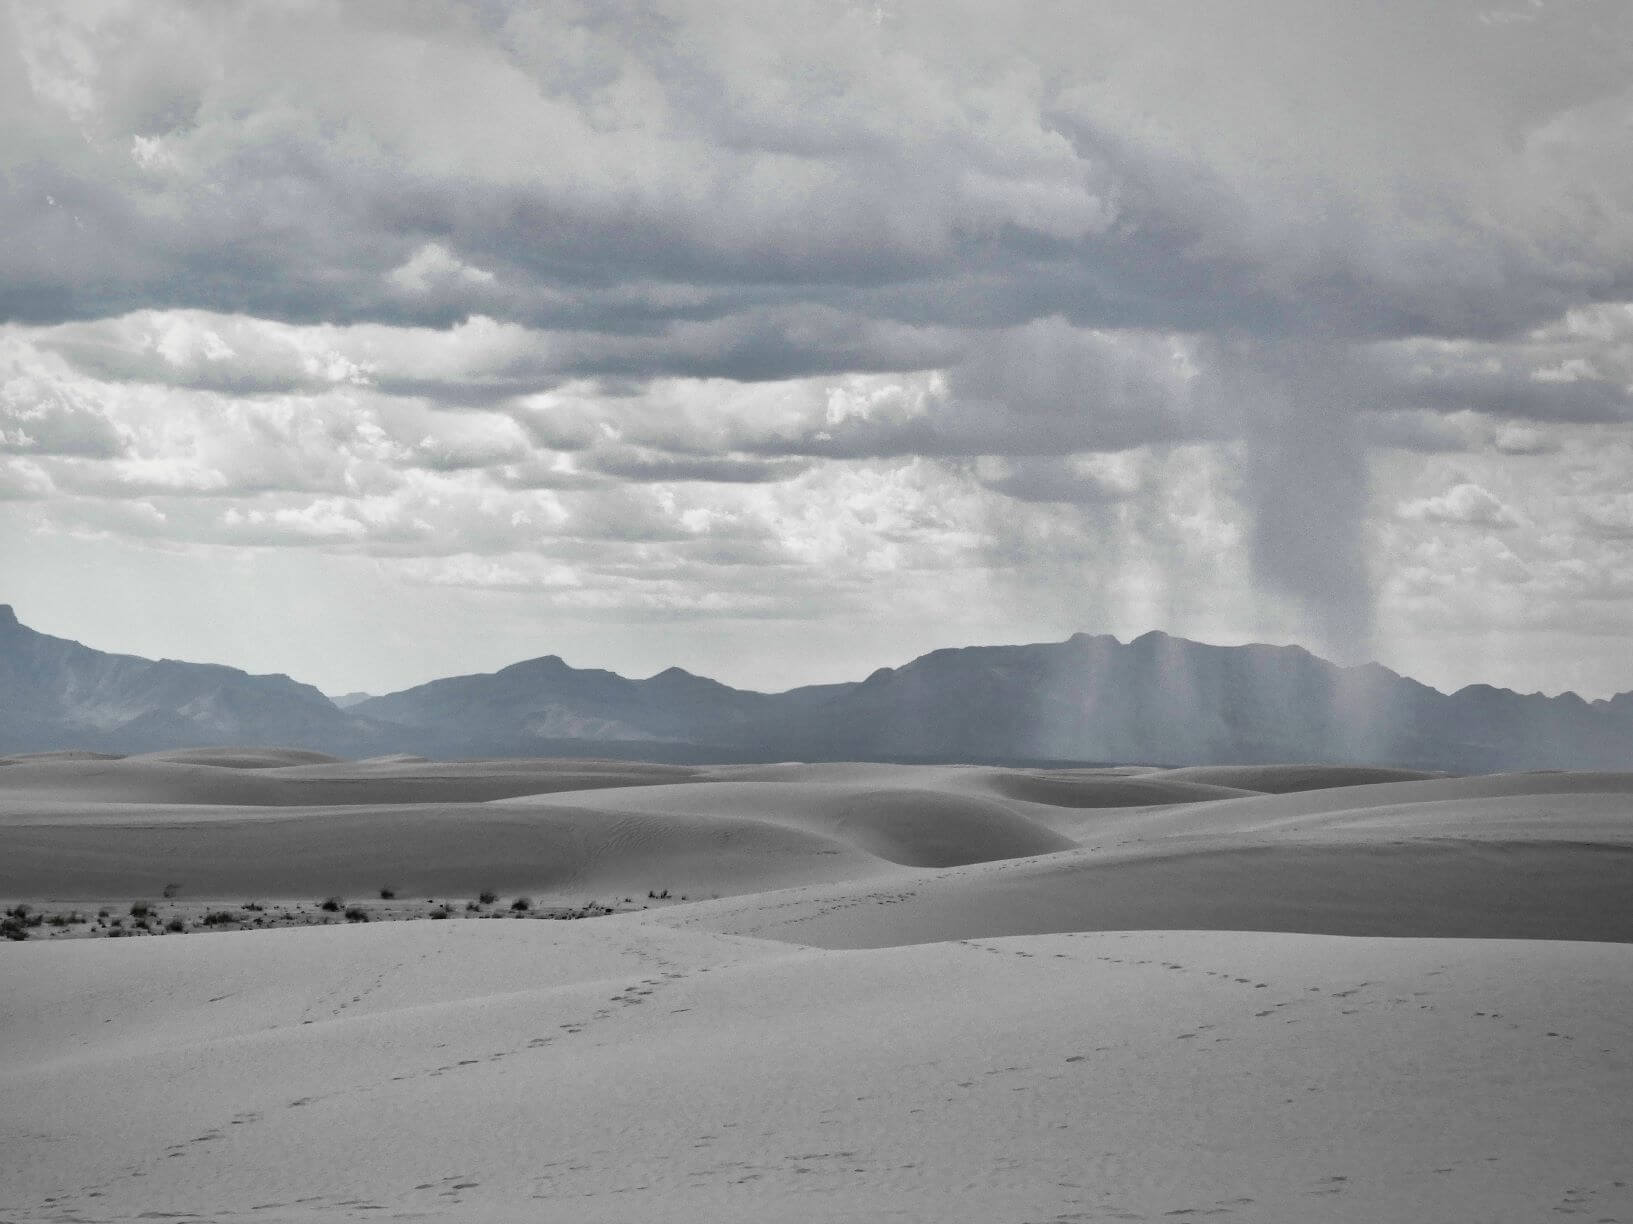 White sand dune fields with mountains and a storm in the distance